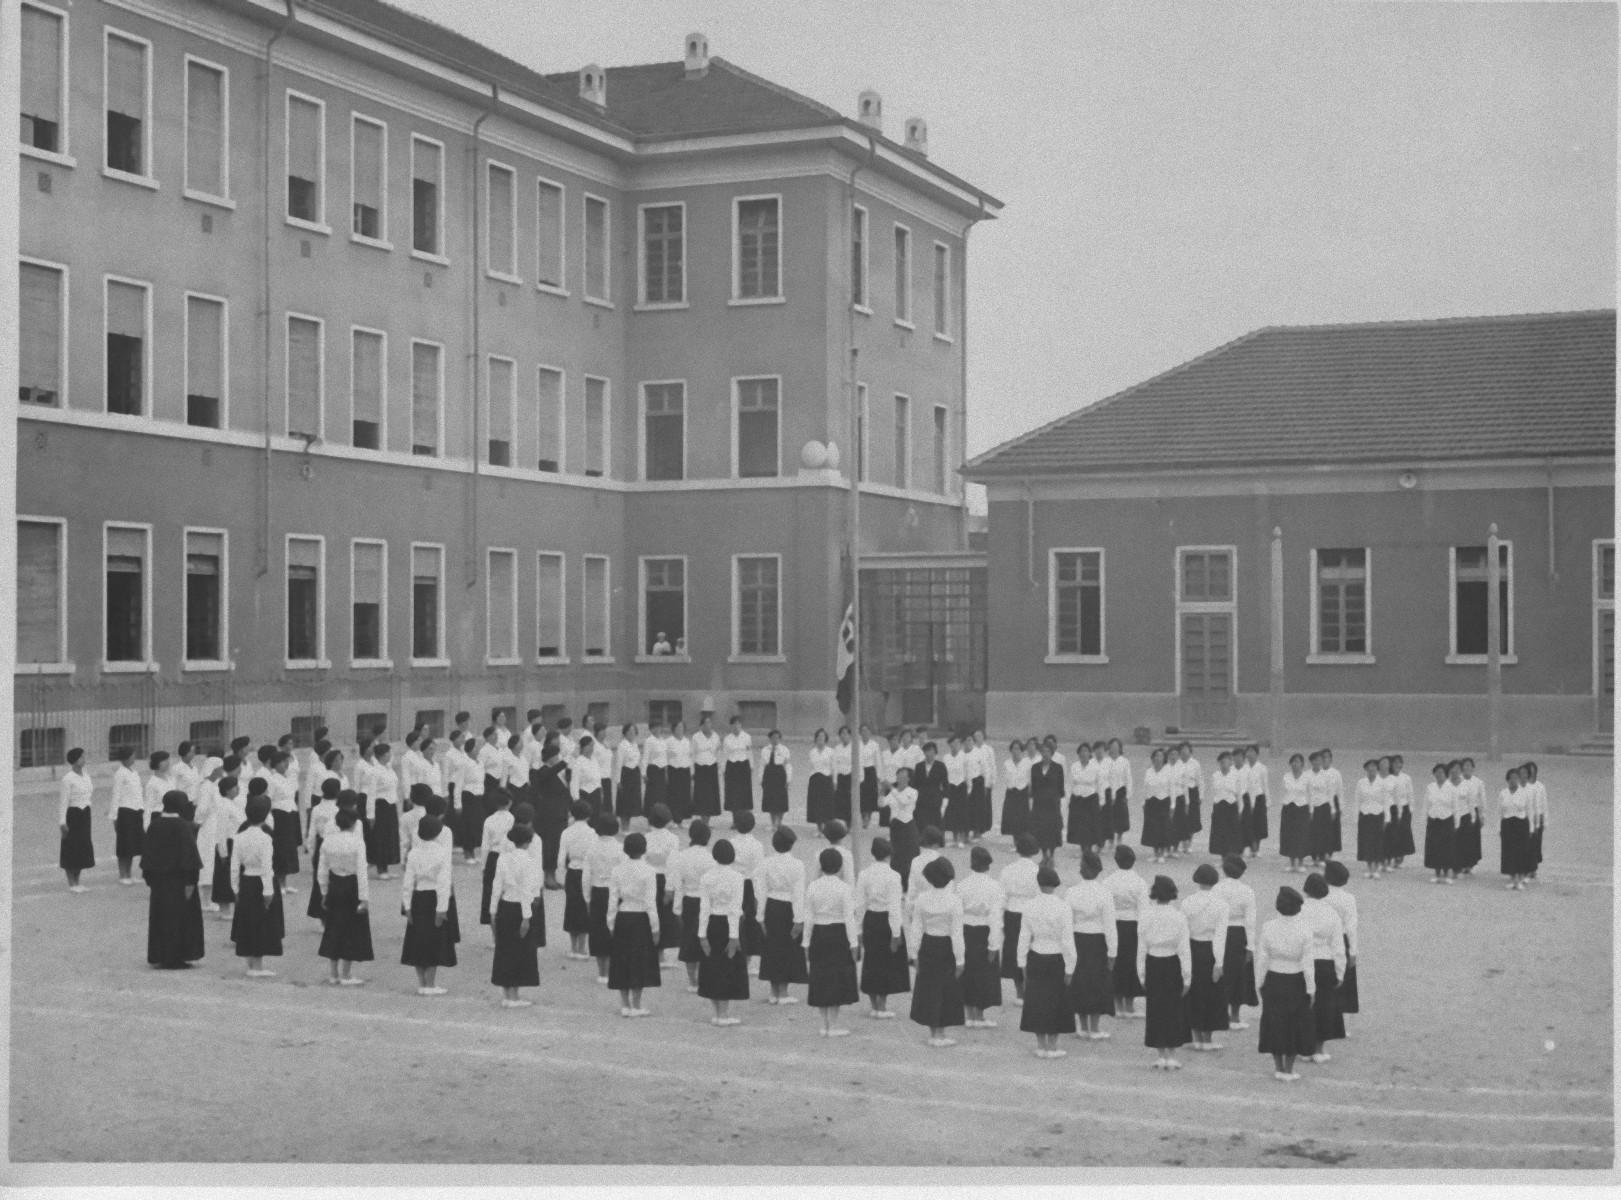 Unknown Figurative Photograph - Fascism - Physical Education in a School - Vintage b/w Photo - 1934 ca.